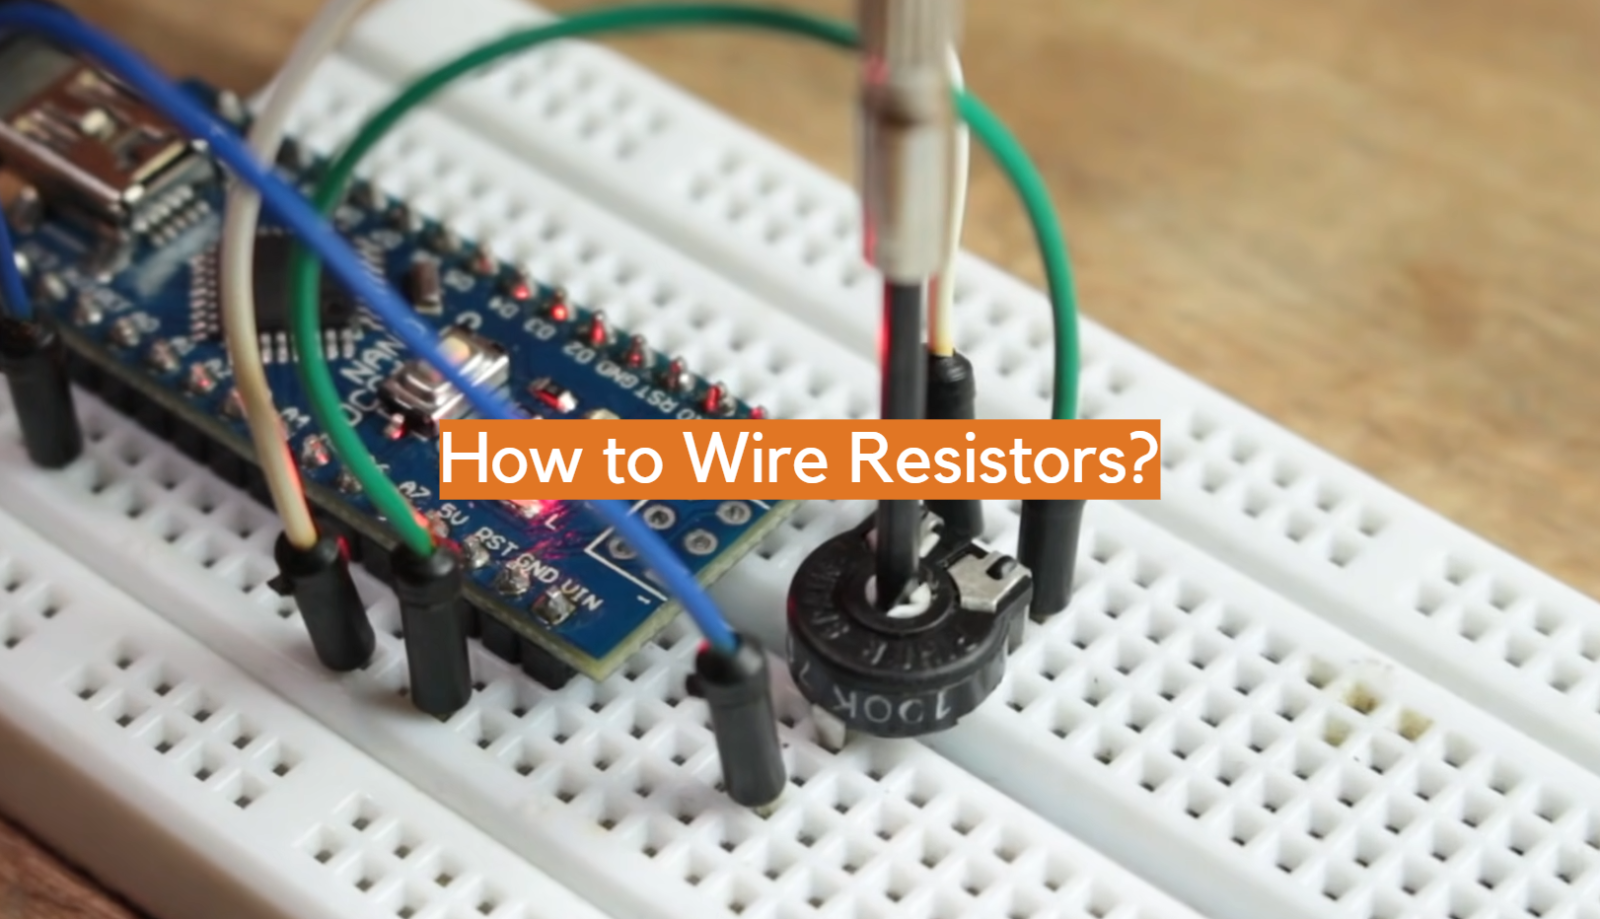 How to Wire Resistors?